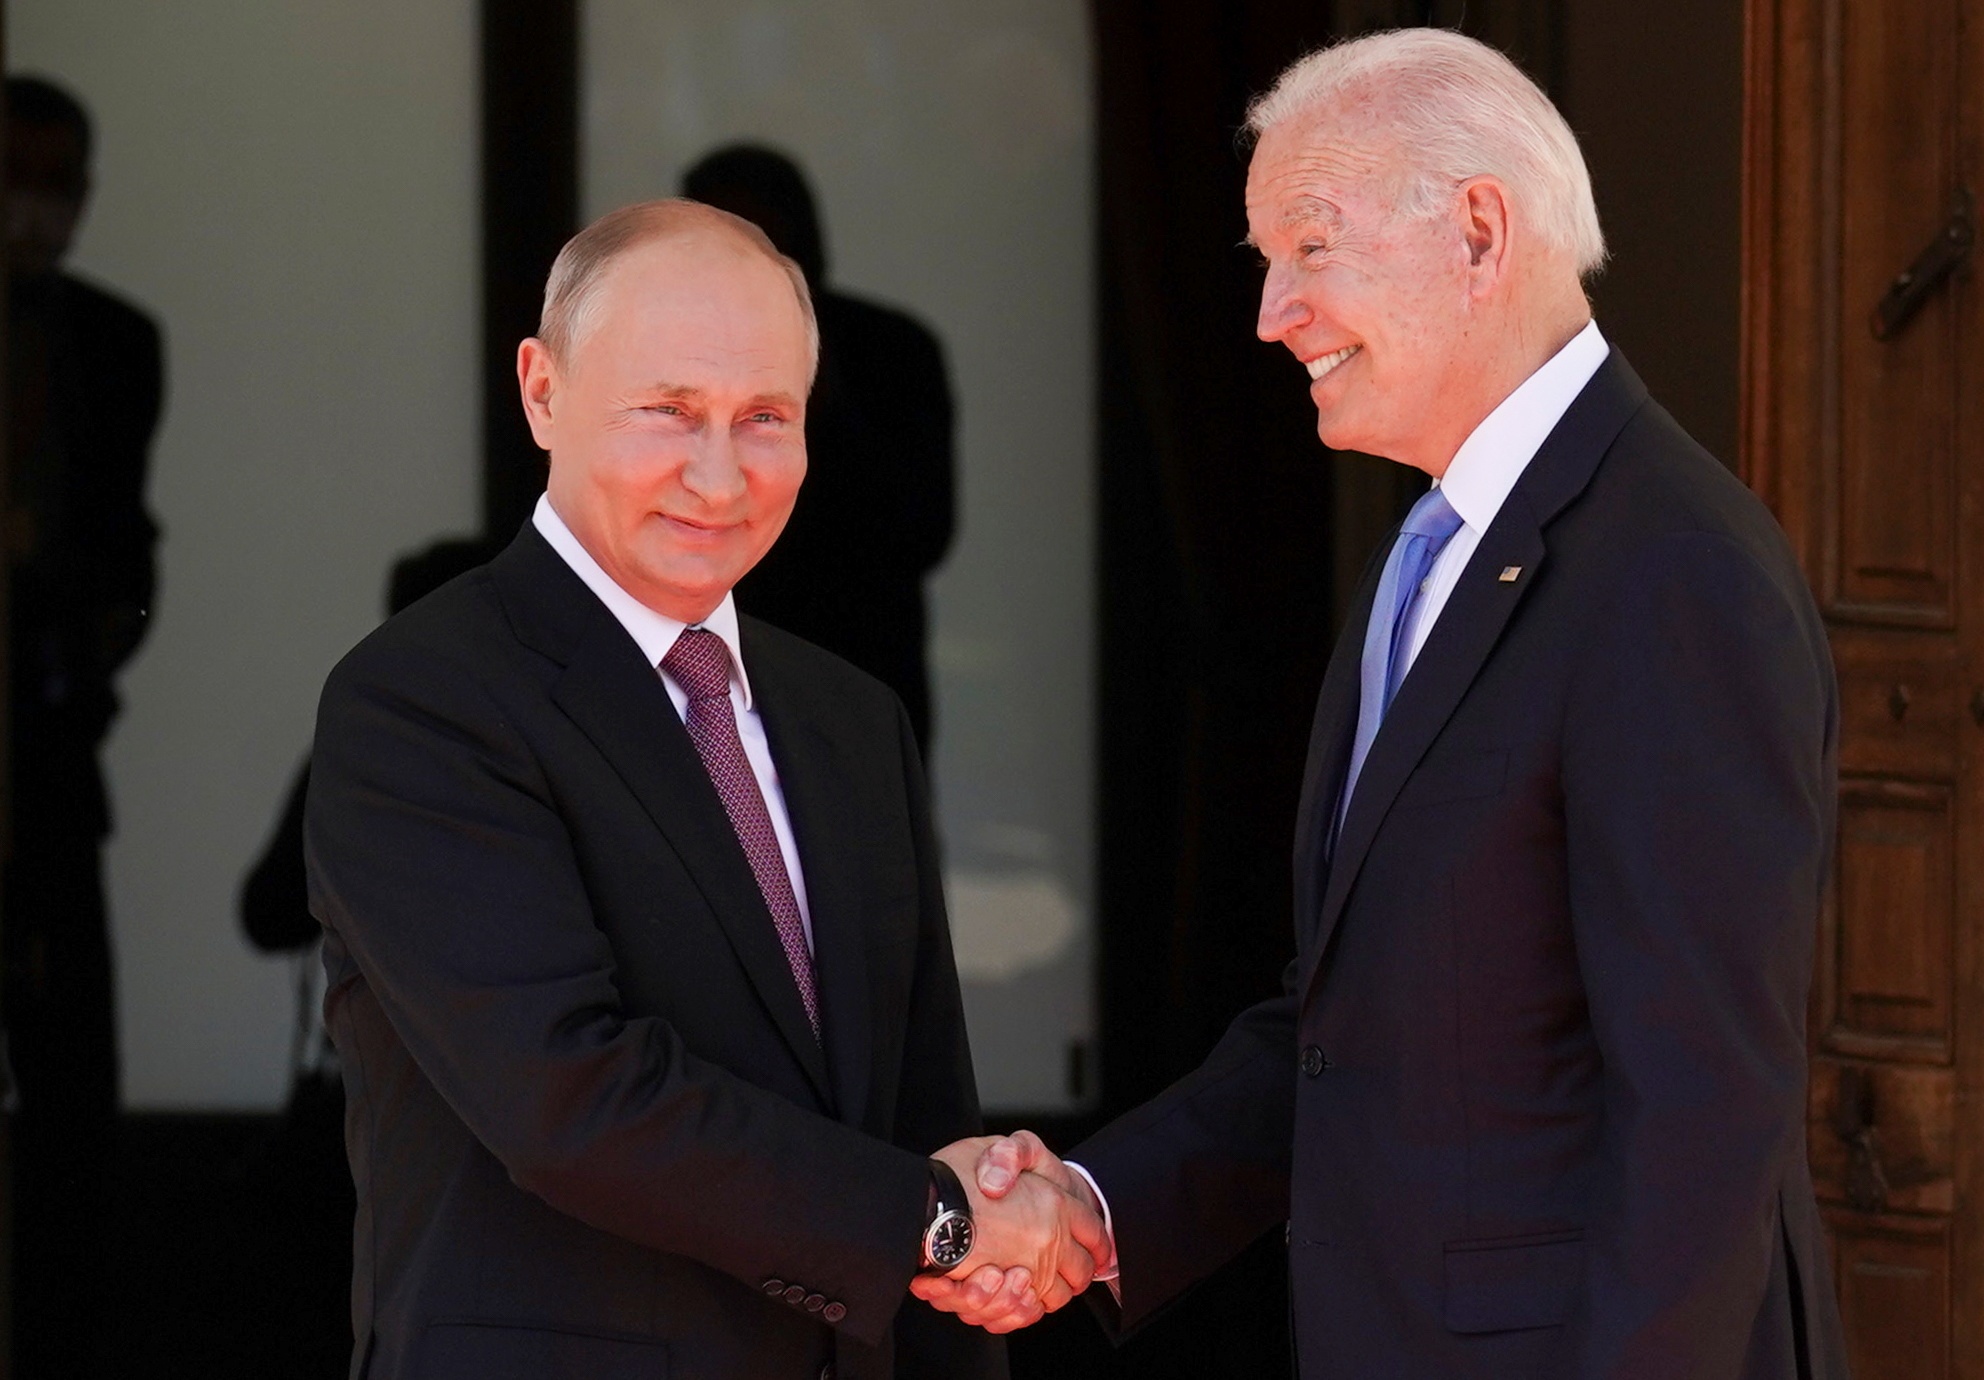  Wide gulf, slim hopes as Putin and Biden arrive for summit